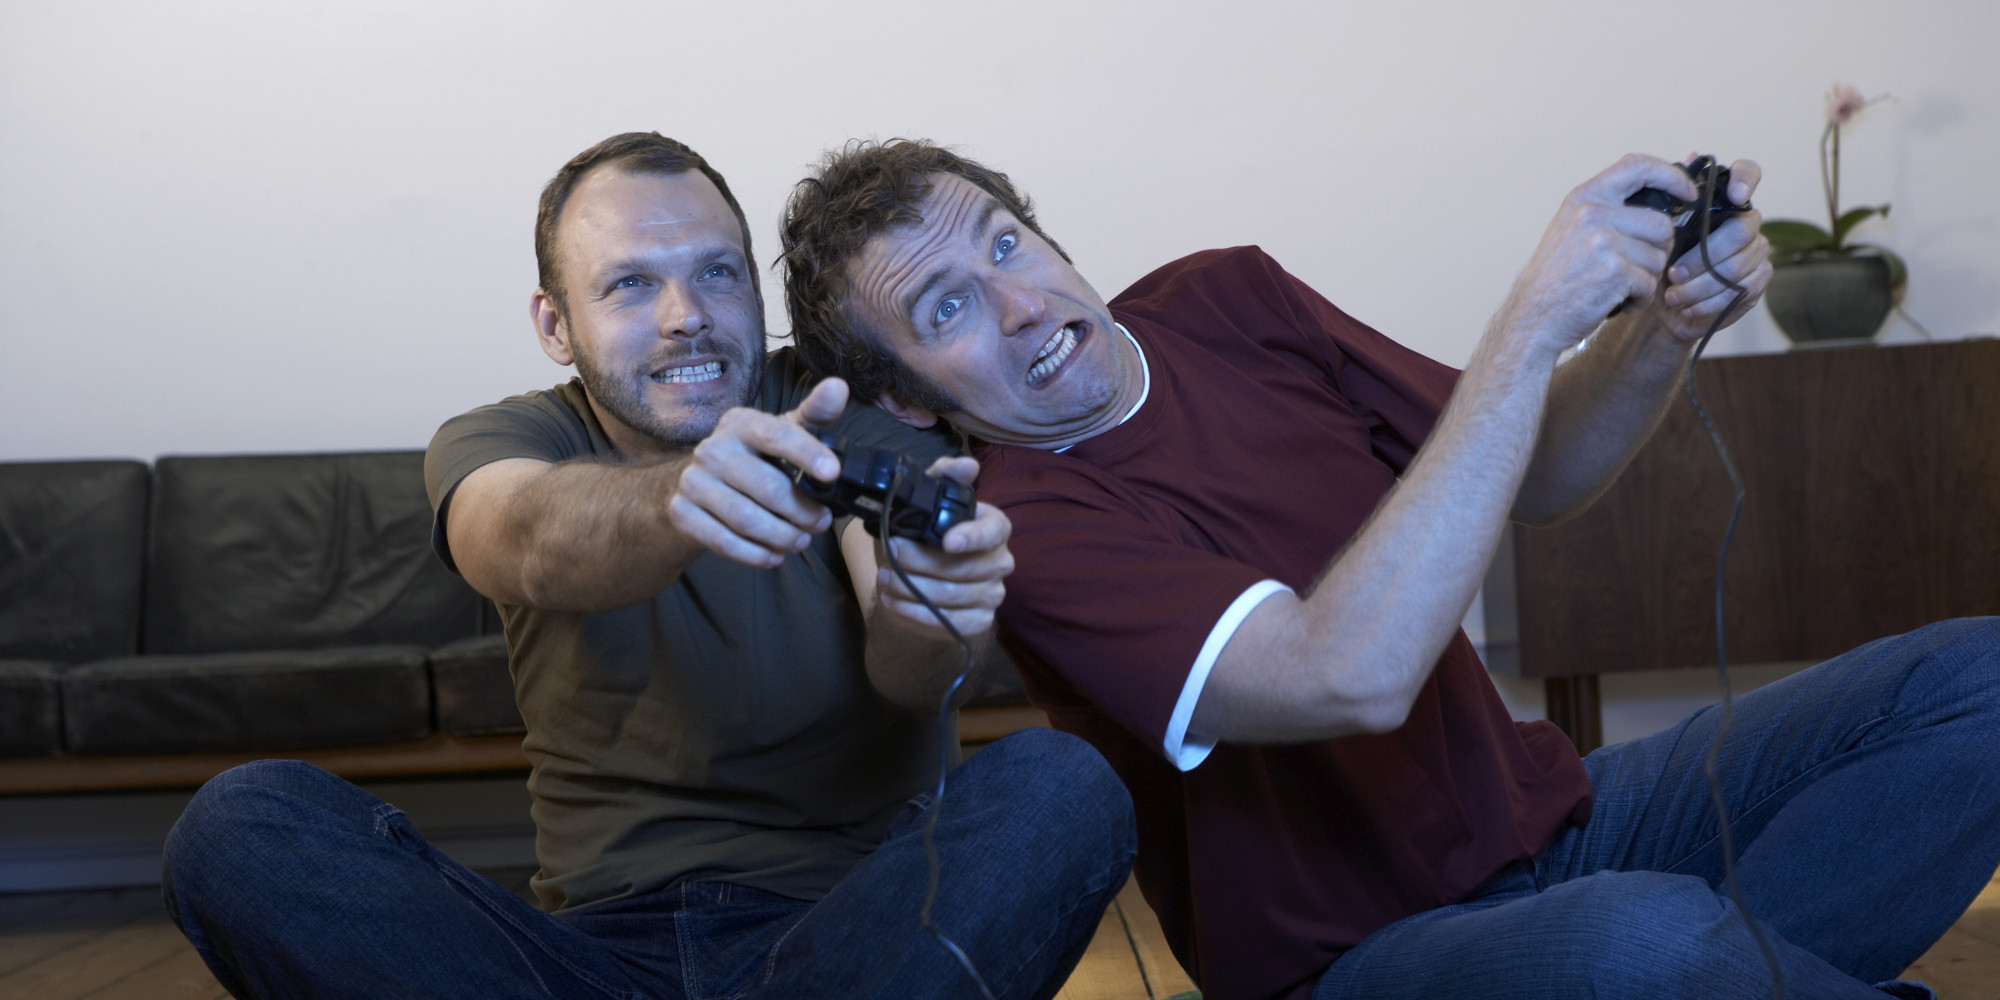 Two mid adult men playing video games